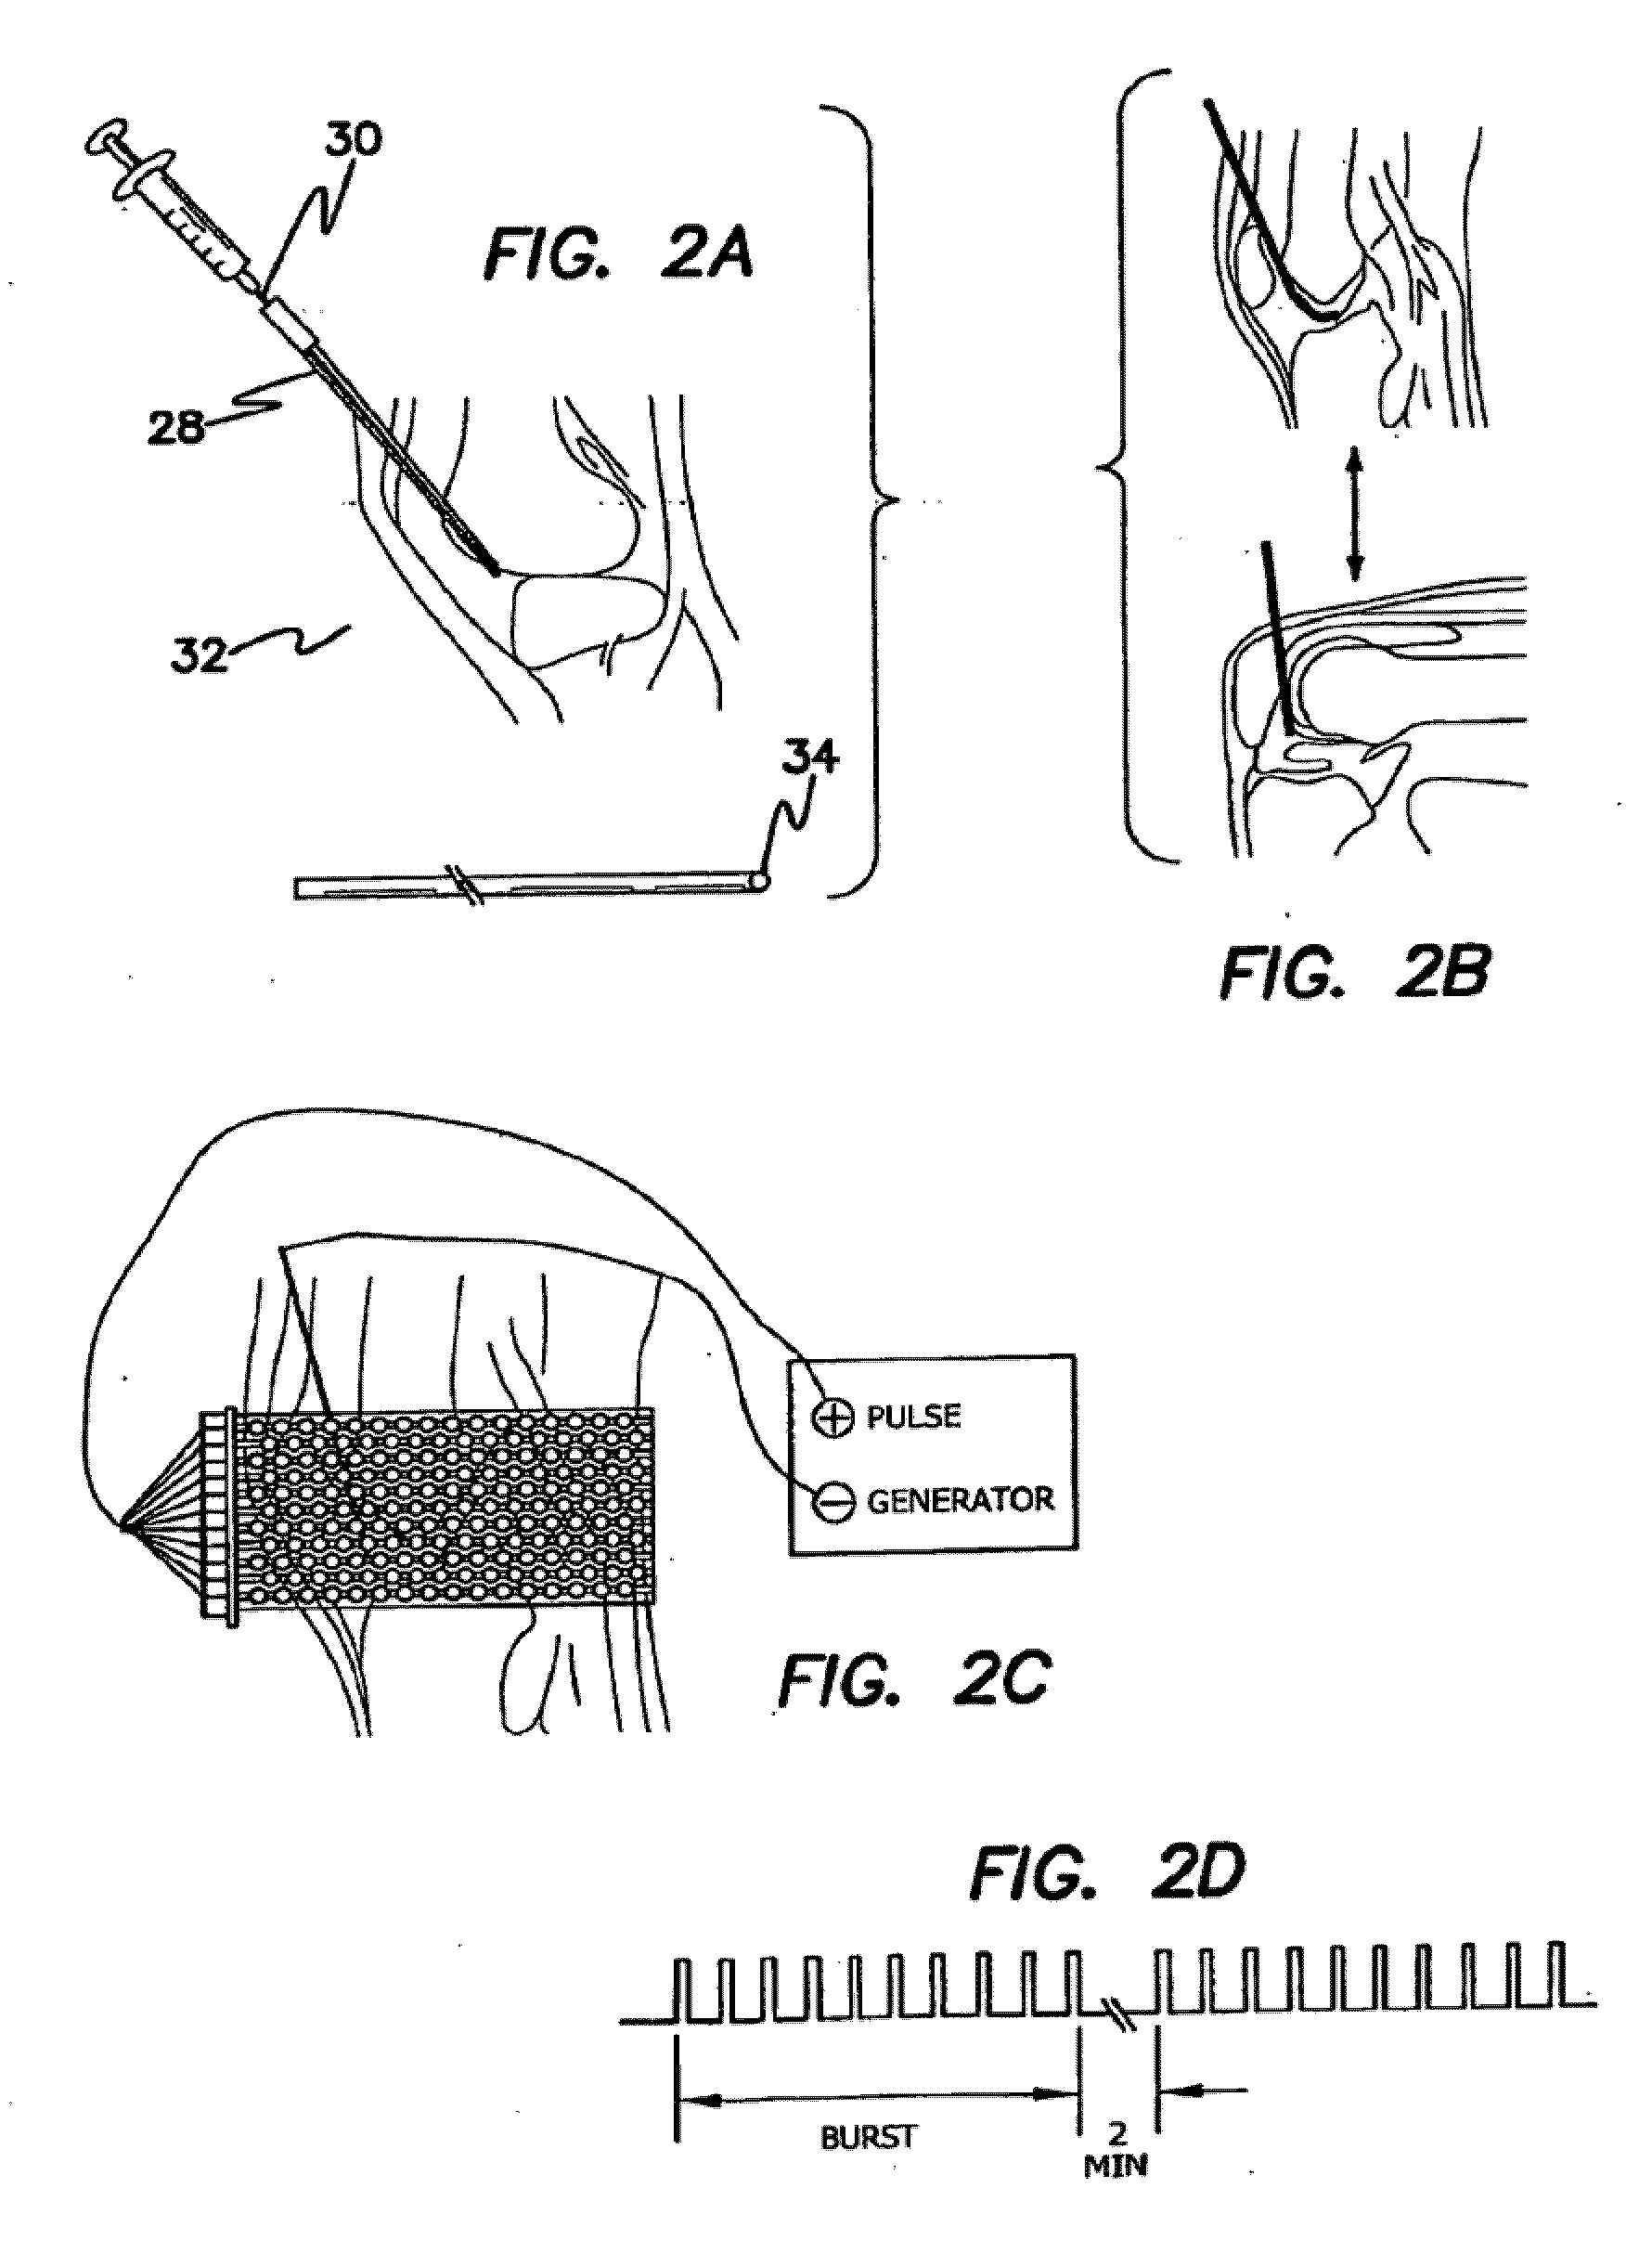 Method and apparatus of low strengh electric field network-mediated delnery of drug, gene, sirna, shrn, protein, peptide, antibody or other biomedical and therapeutic molecules and reagents in skin, soft tissue, joints and bone